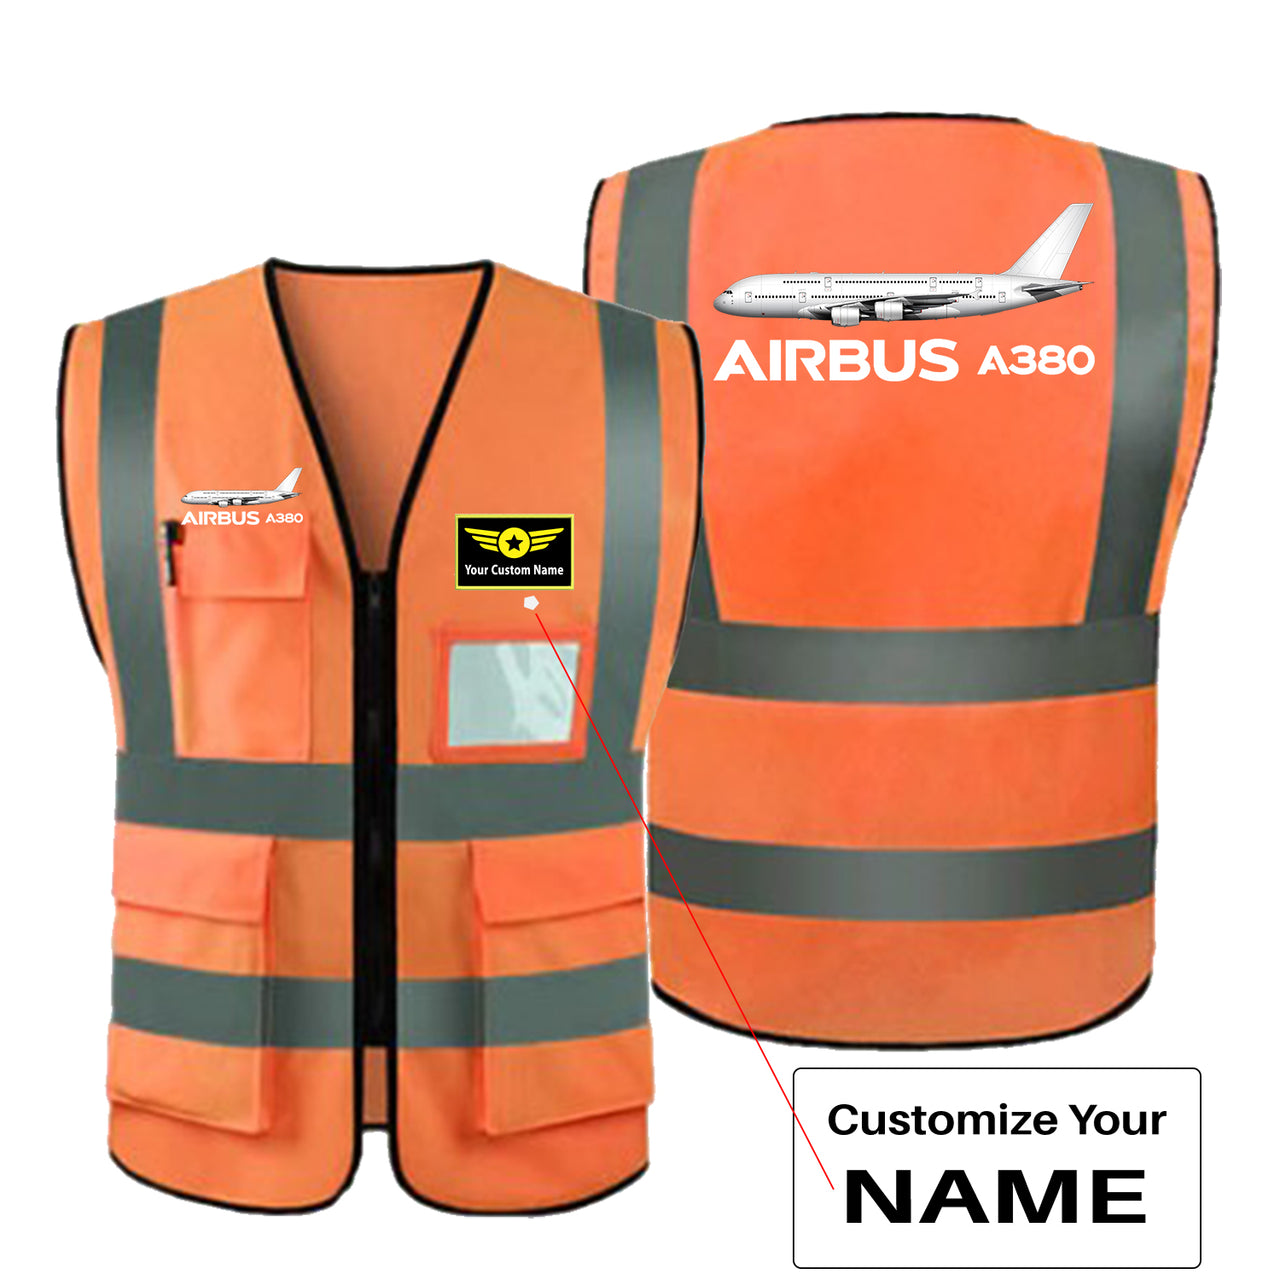 The Airbus A380 Designed Reflective Vests